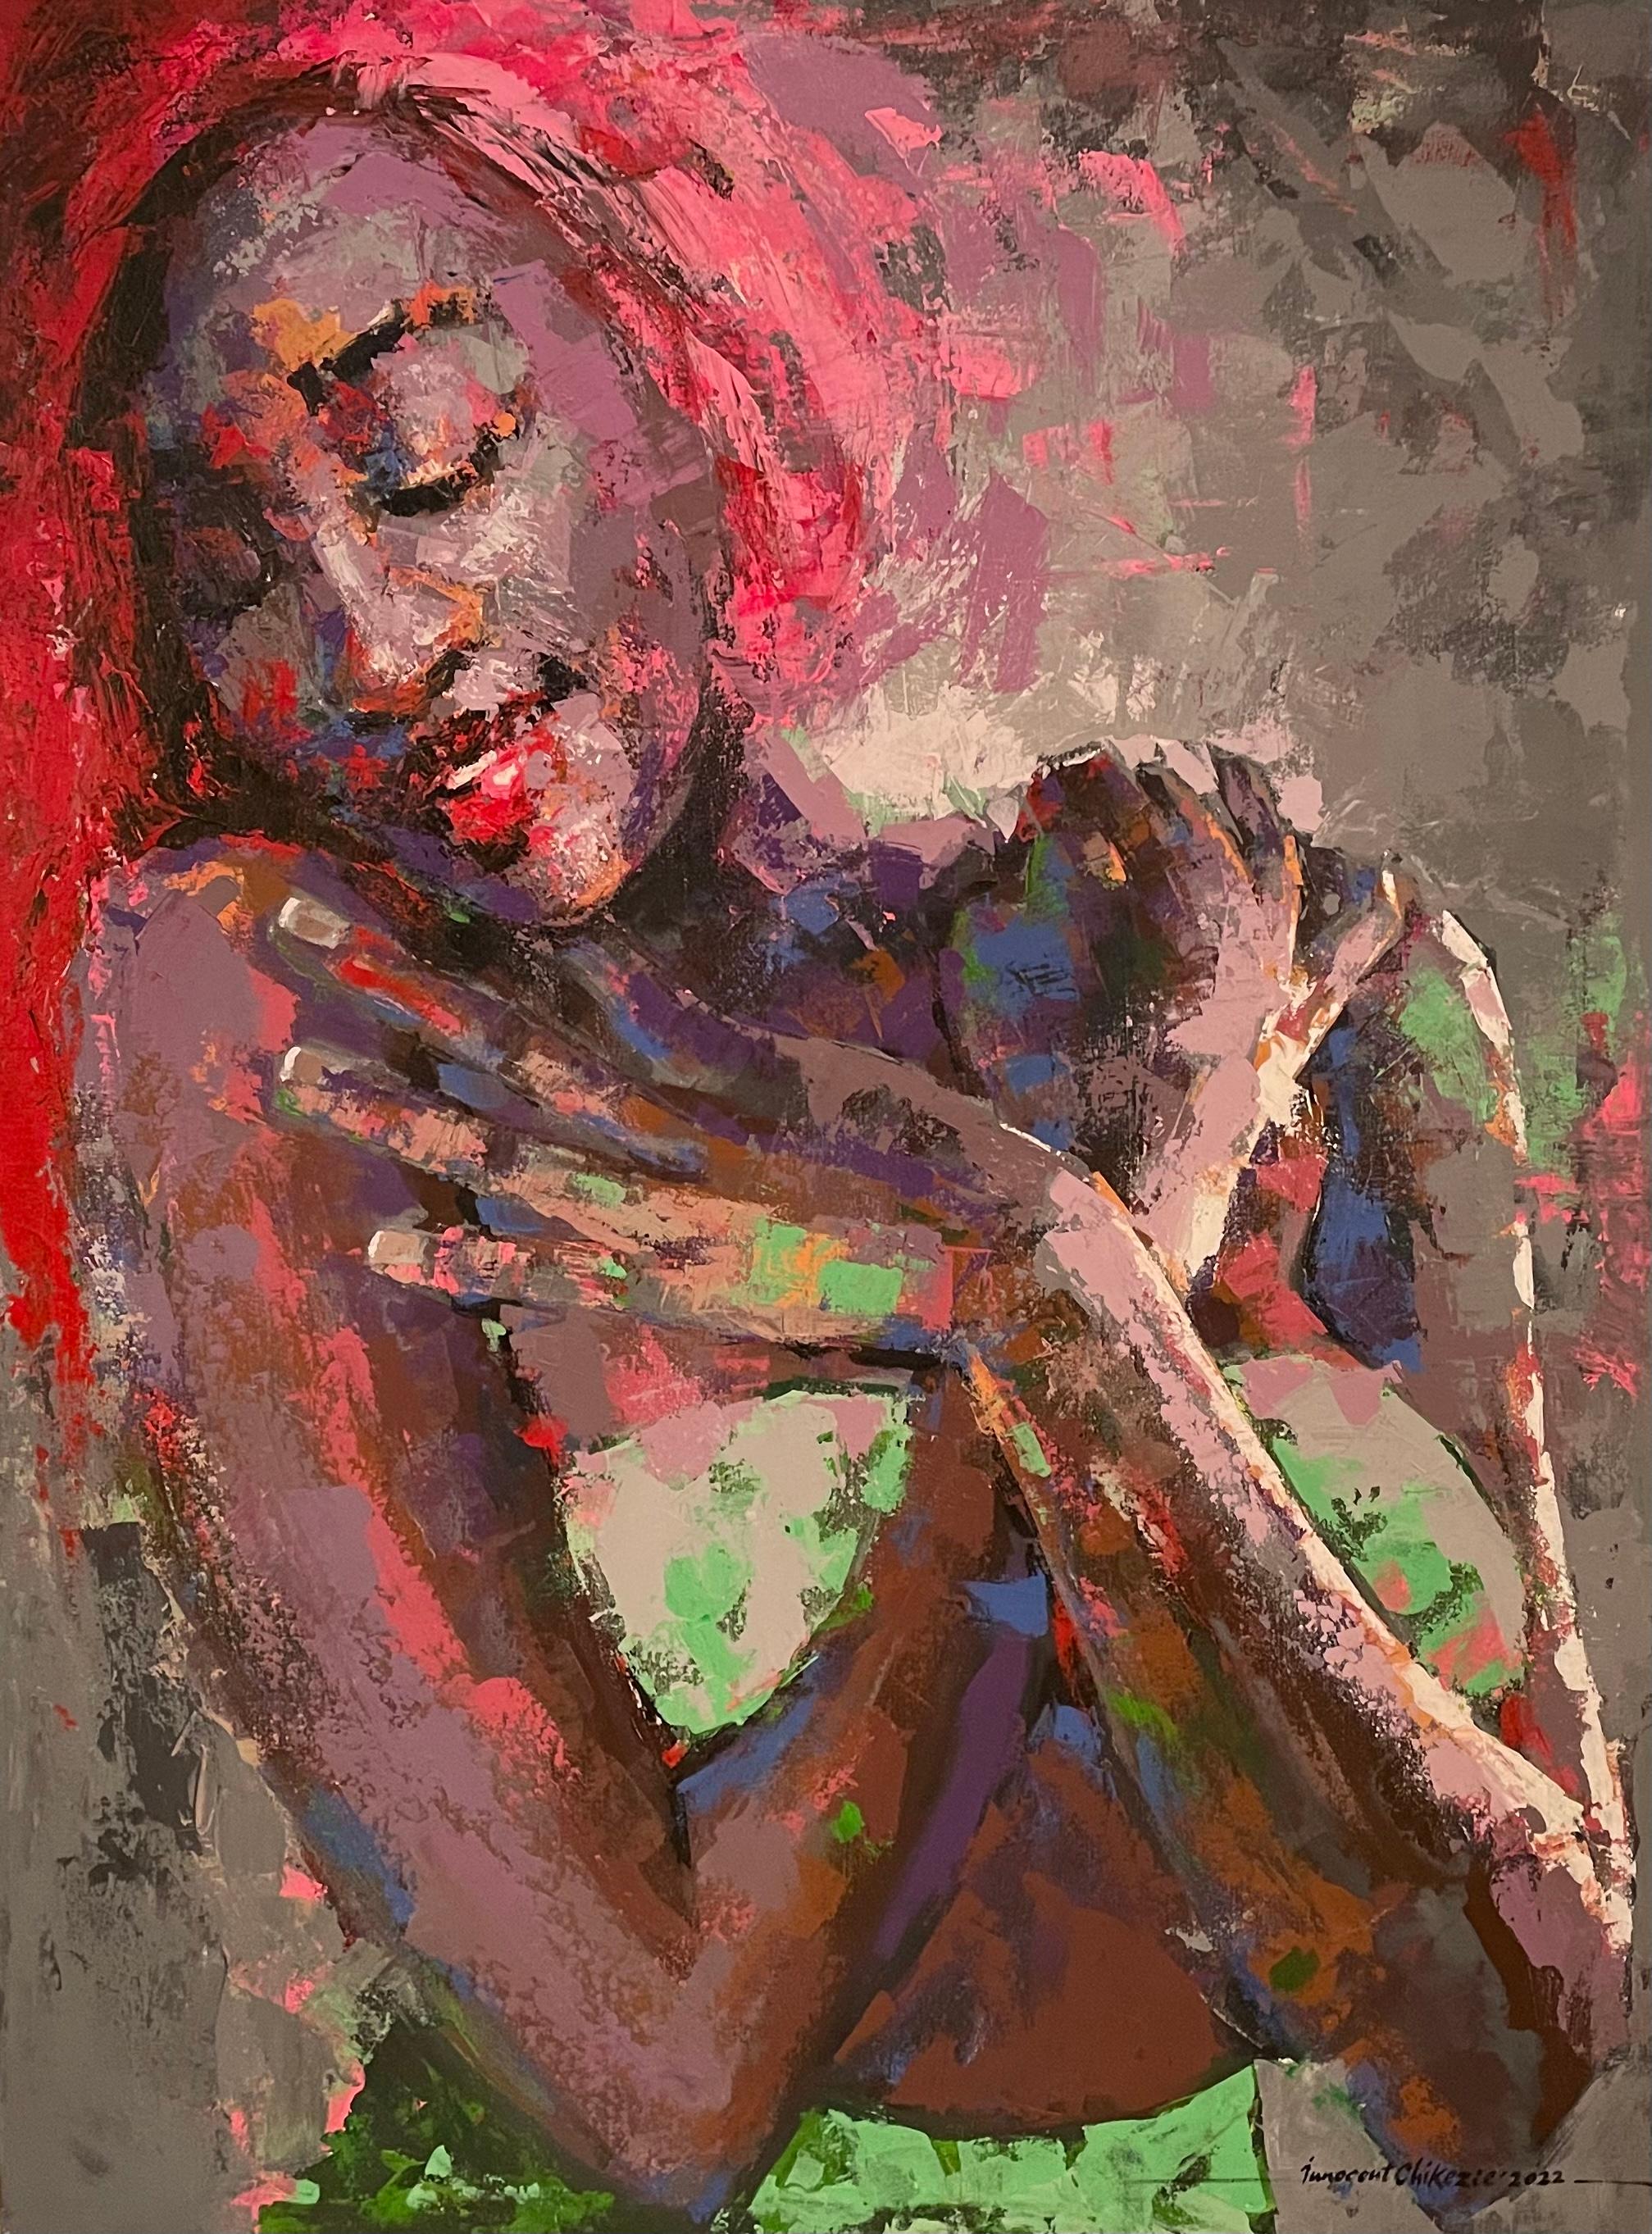 Innocent Chikezie Figurative Painting - 'Pink Hair' Figurative Young Woman Acrylic on Canvas by Innocent